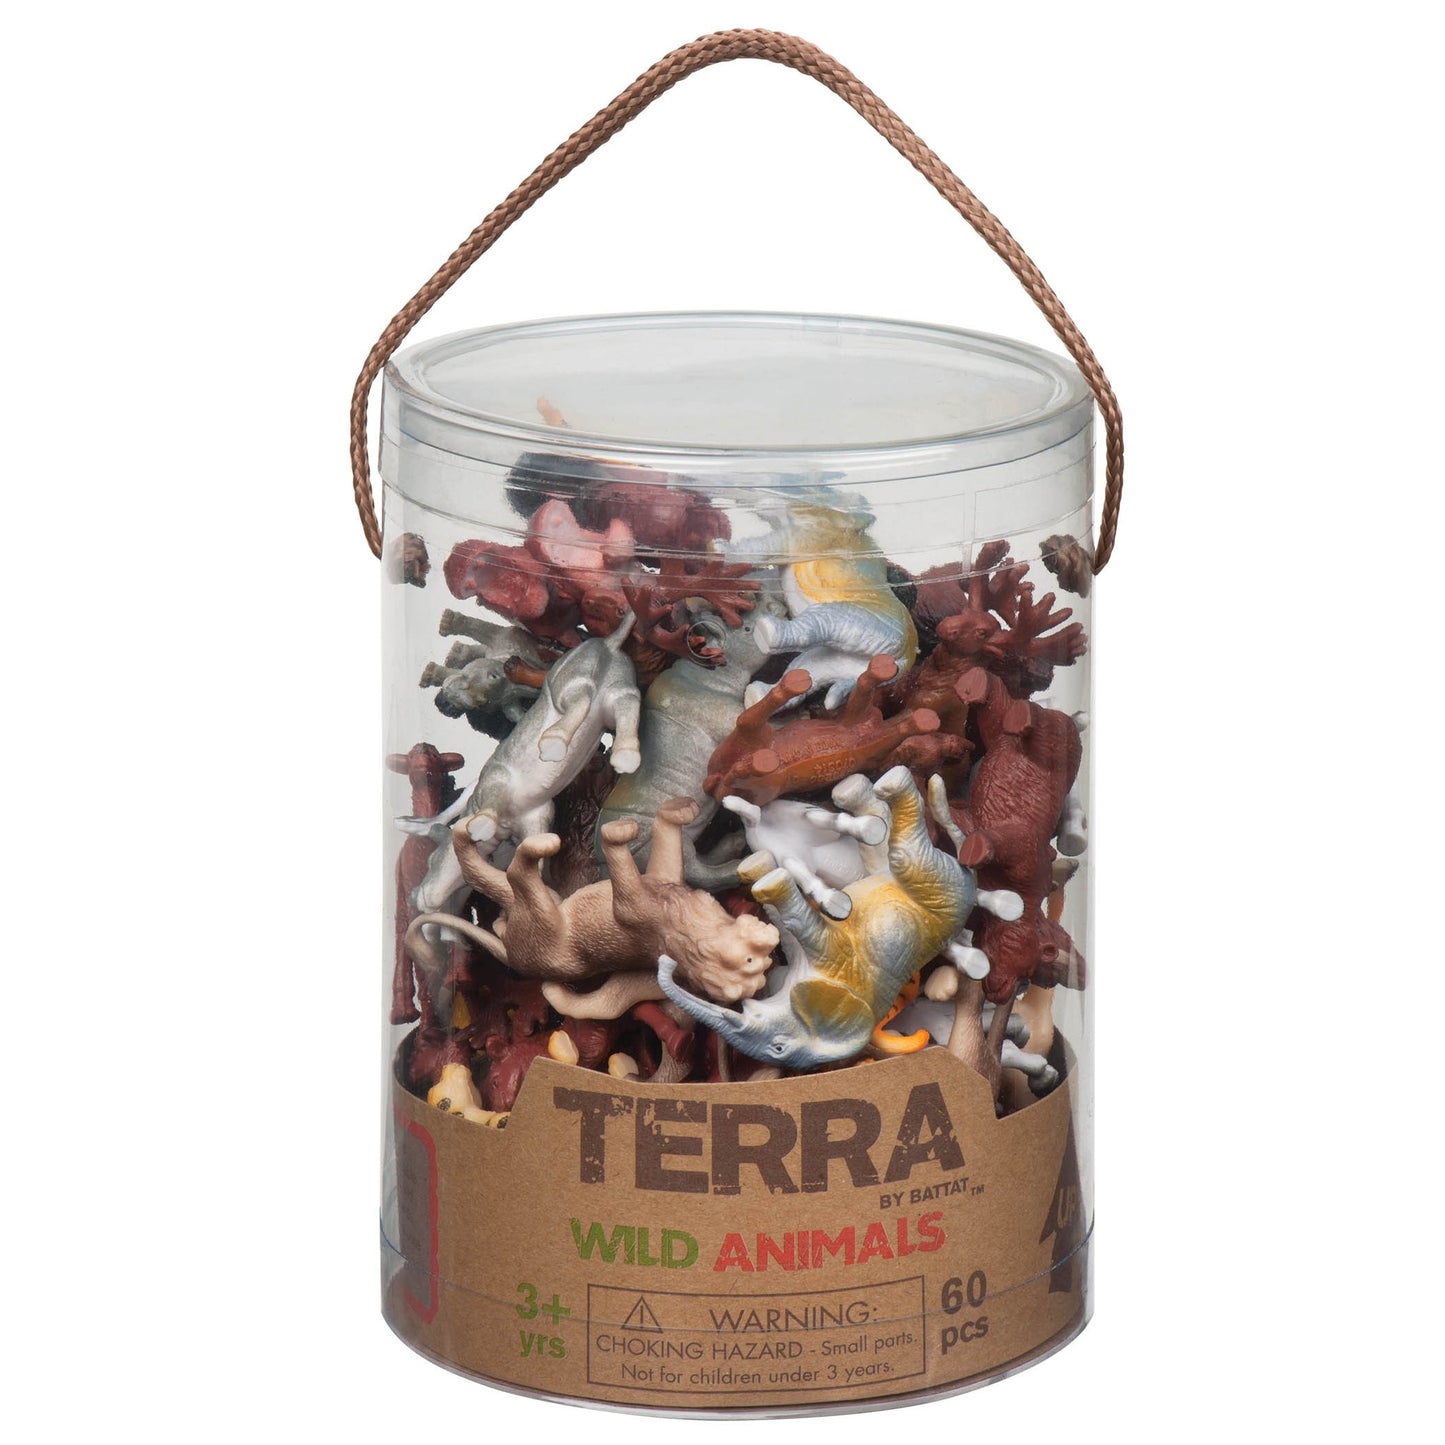 Terra by Battat - Wild Animals (for 3 years old and up)